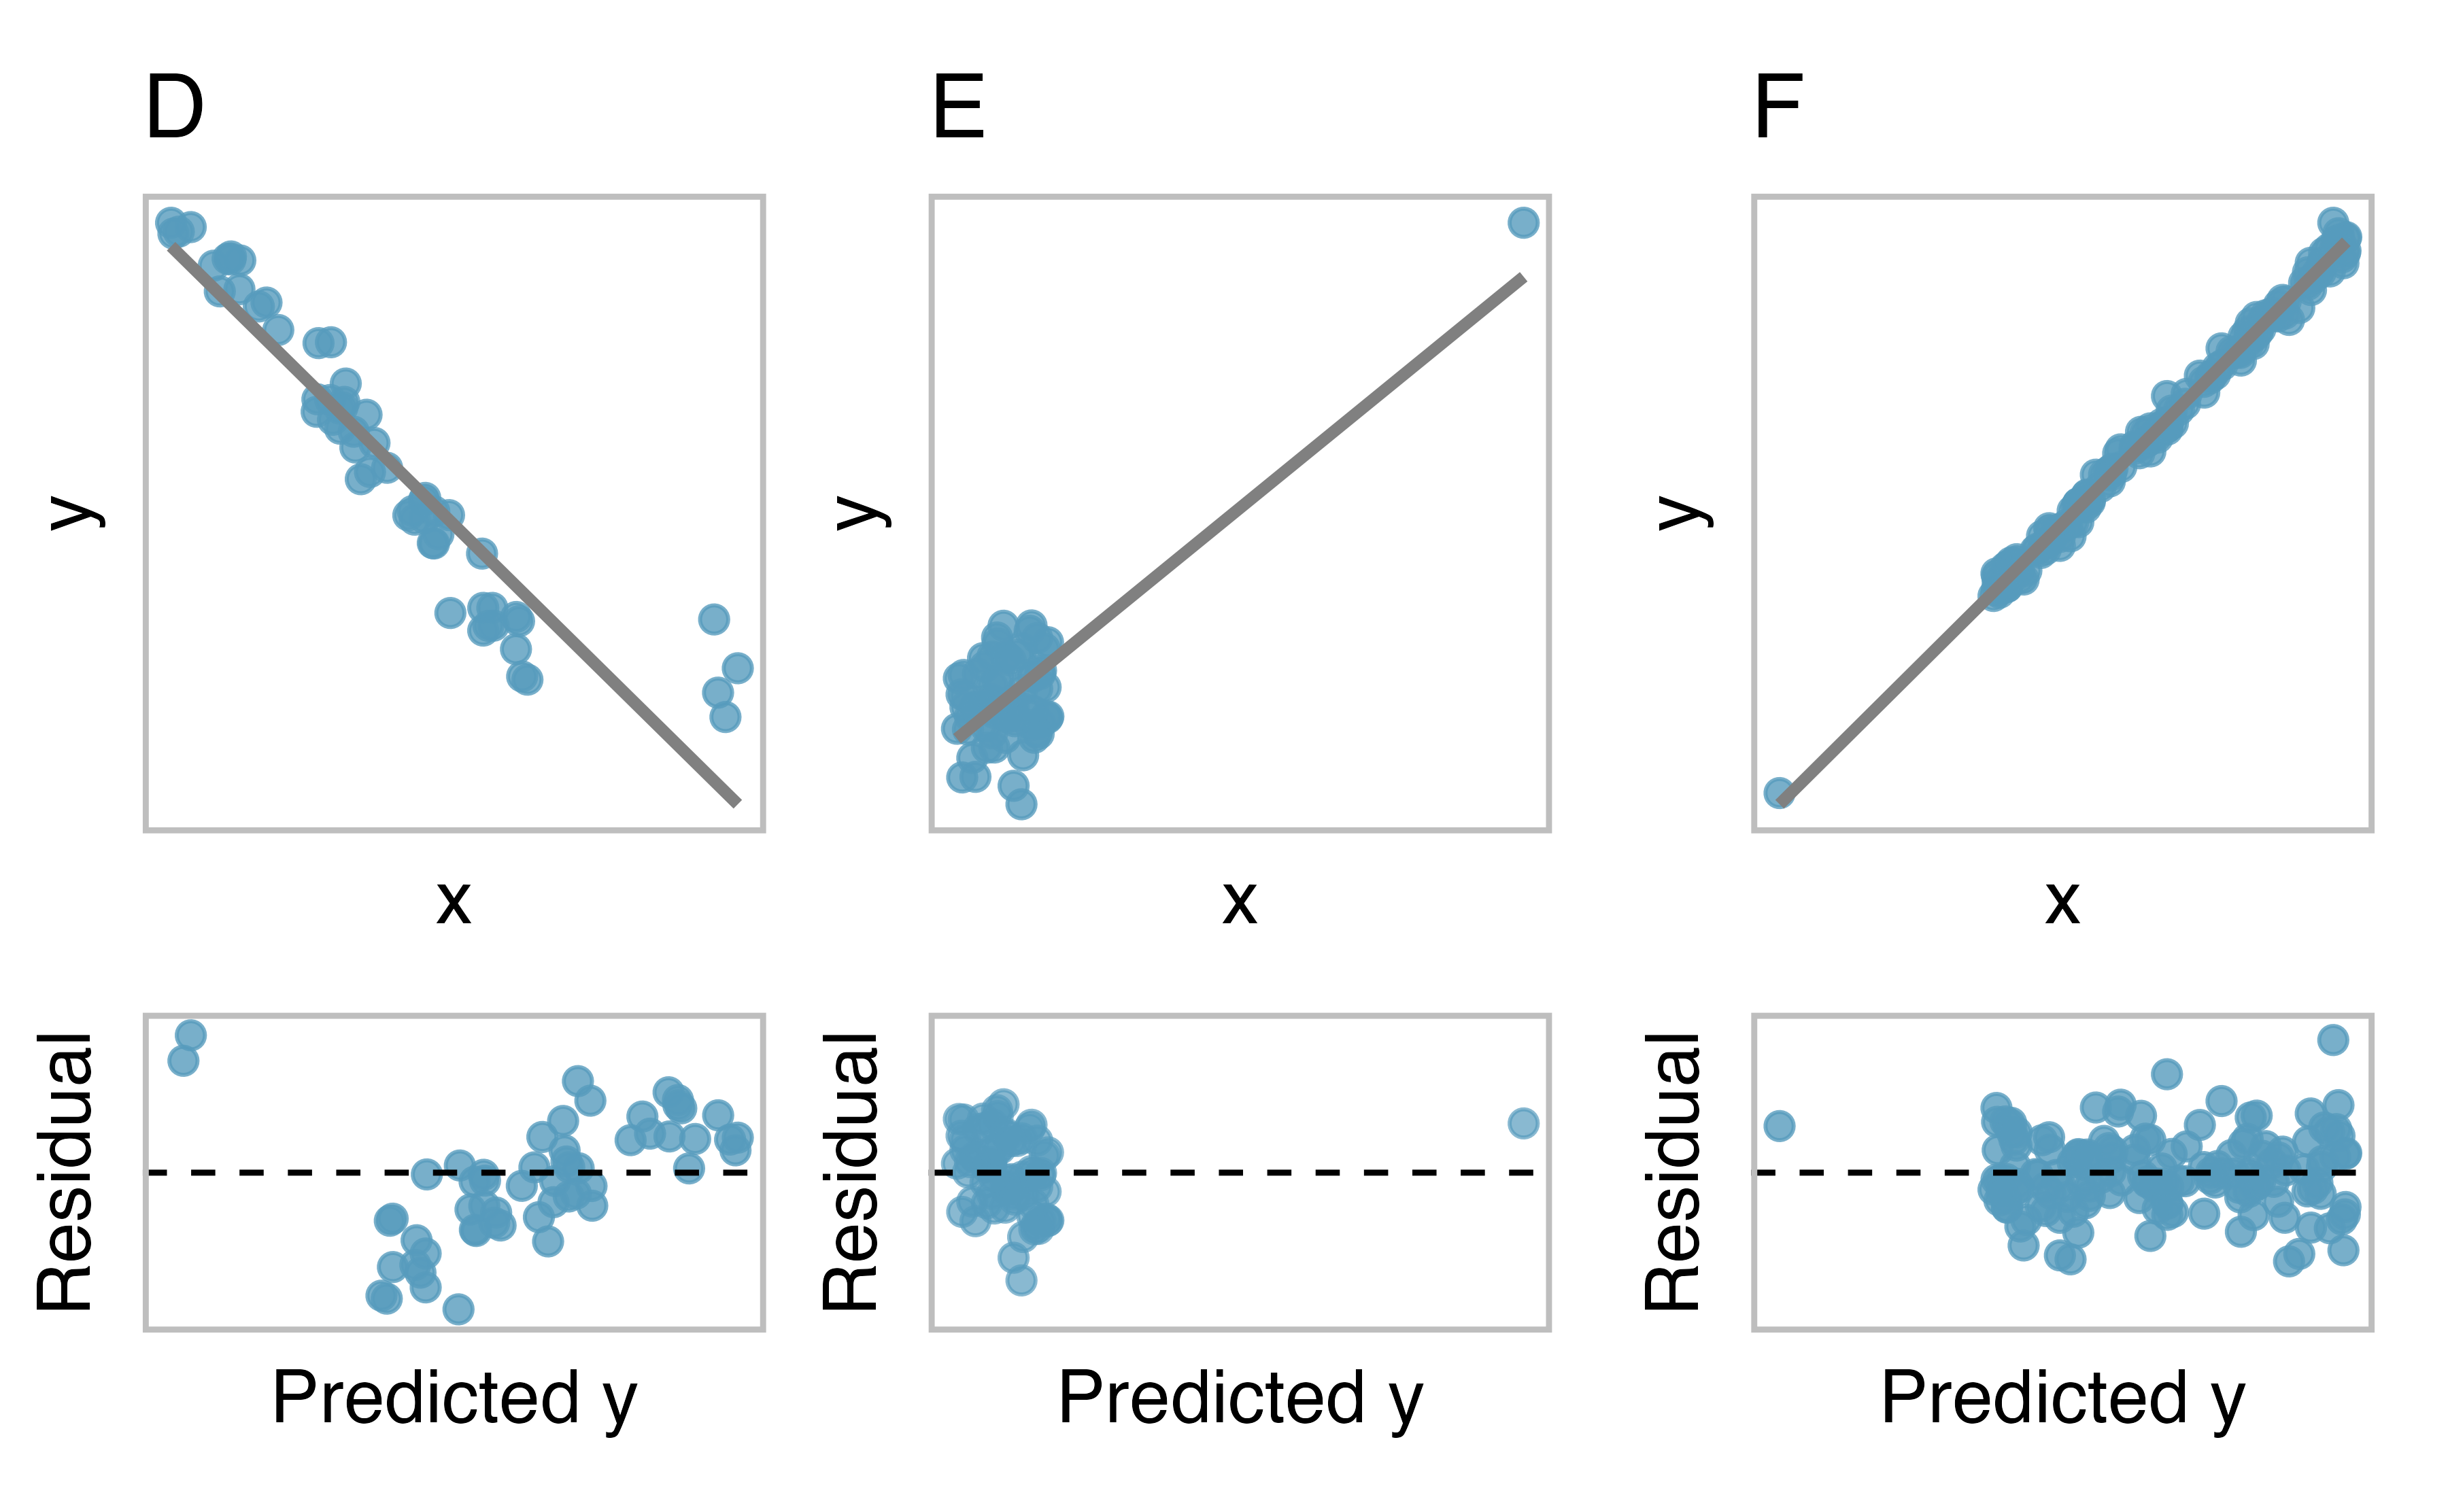 A grid of 2 by 3 scatterplots with fabricated data, all of which contain at least one outlying observation.  The top row of plots contains original x-y data plots with a least squares regression line.  The bottom row of plots is a series of residual plot with predicted value on the x-axis and residual on the y-axis.  The first column of plots gives an example of a small cloud of points that drags the regression line toward it.  The second column gives an example of a point which is outlying enough in both the x and y direction that it changes a model which has no linearity into what seems like a strong positive relationship. The third column gives an example of a point that is far in both the x and y directions but is in-line with the regression model and has very little impact on the least squares regression line.